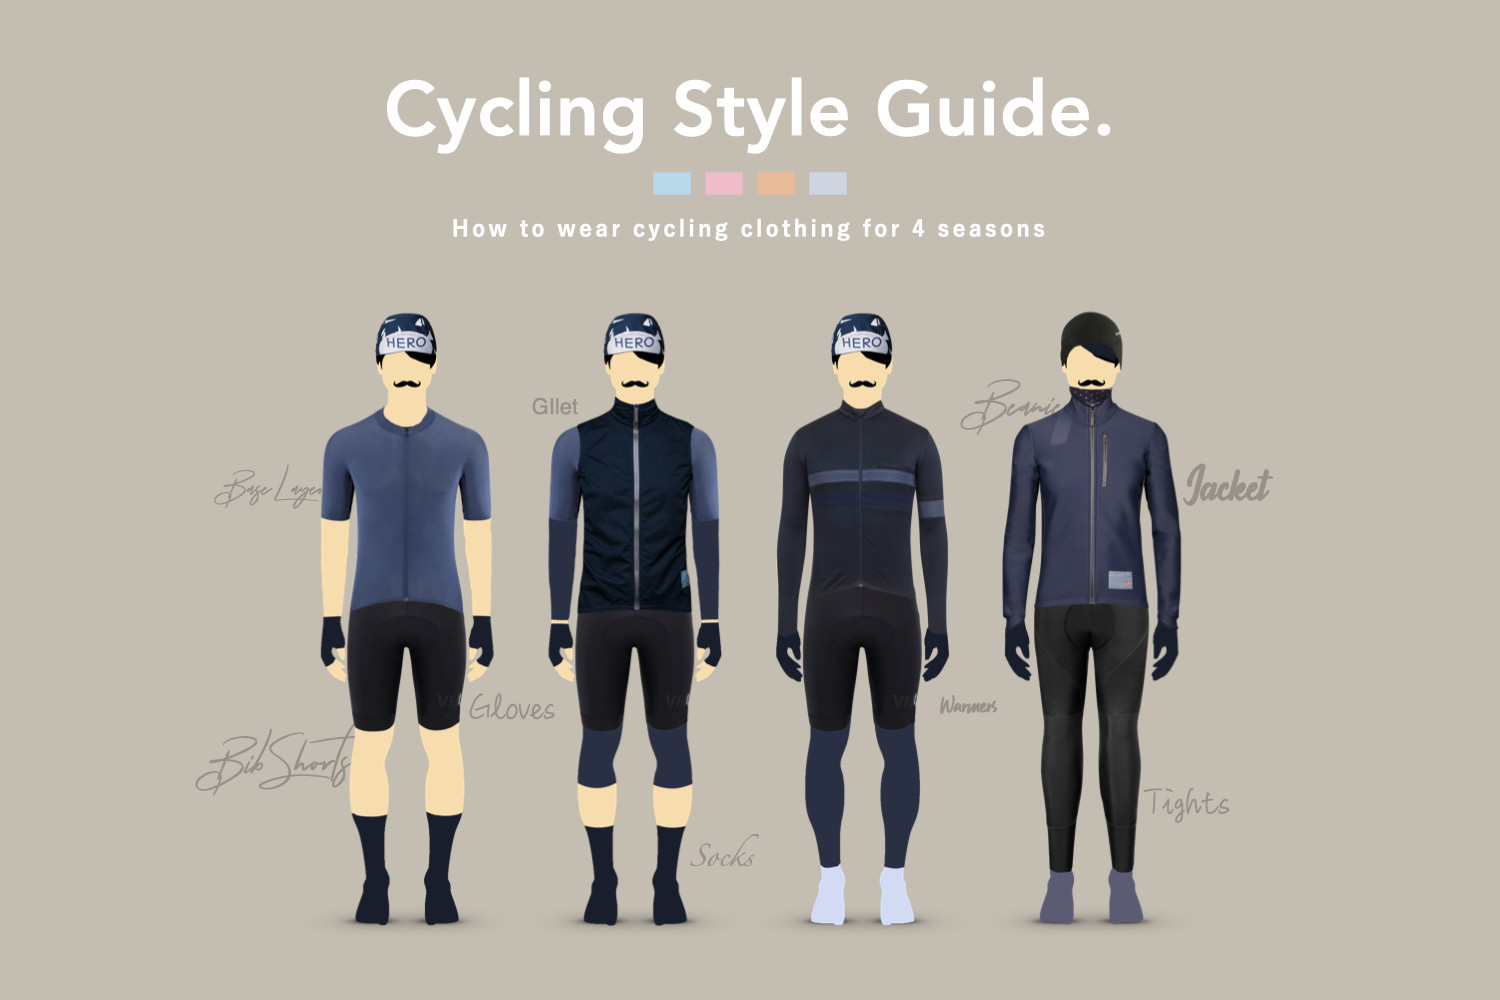 What to Wear for Winter Biking at Every Temp